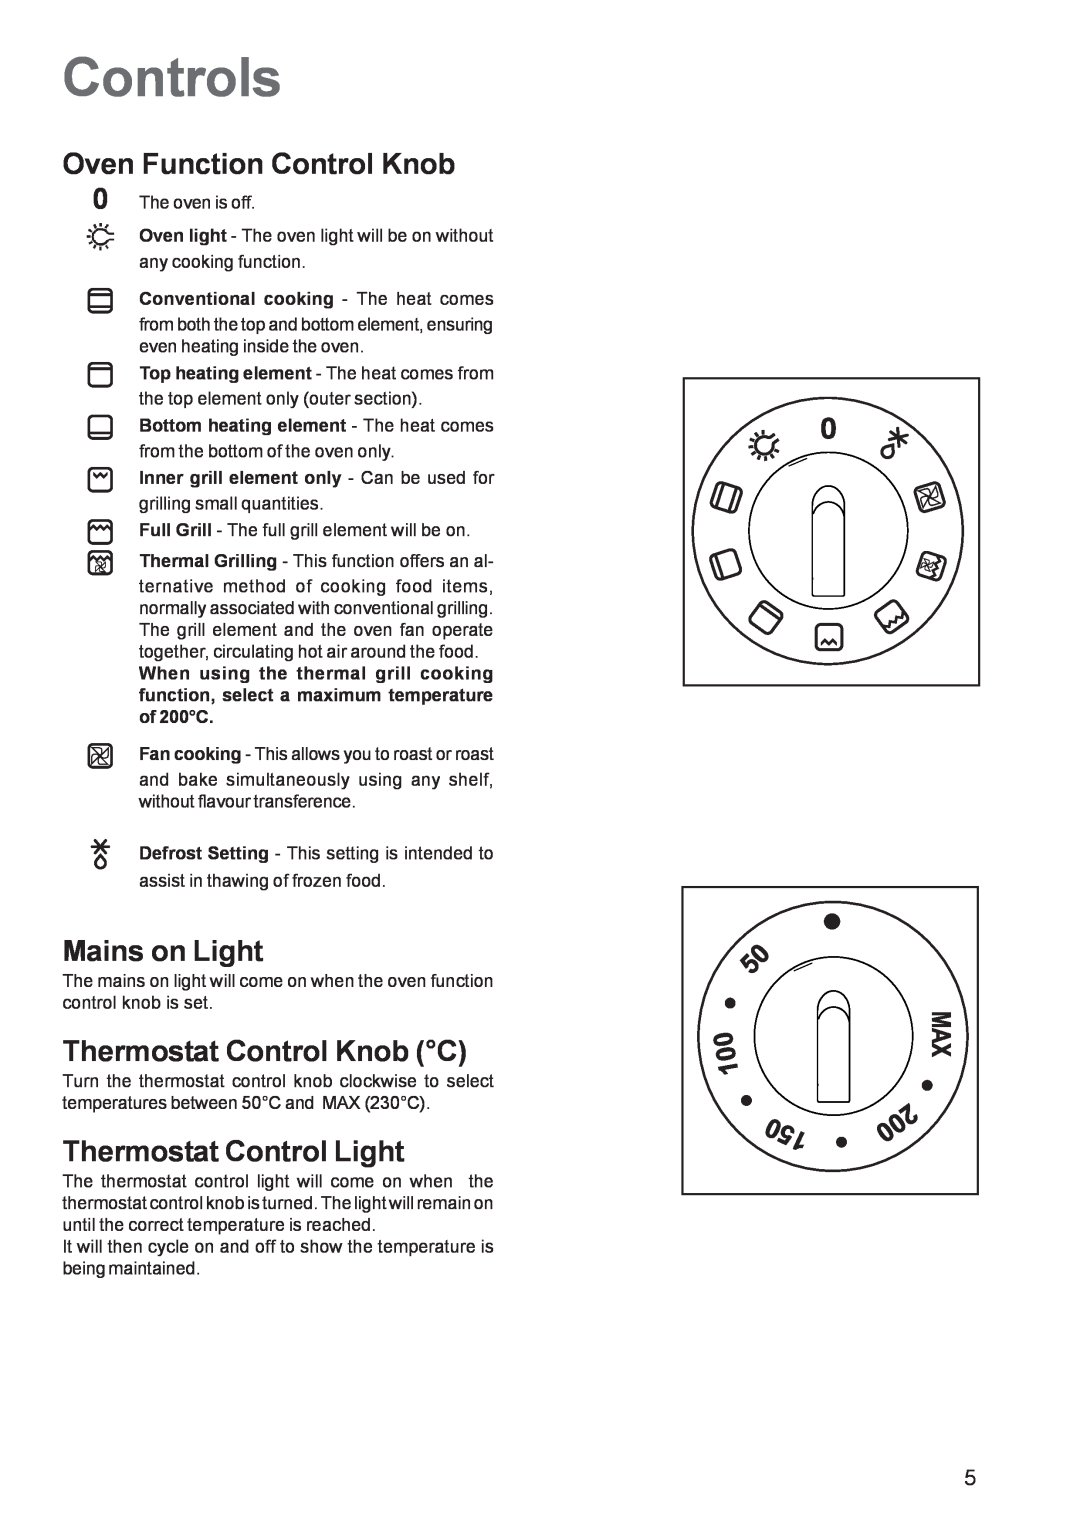 Zanussi ZBS863 Controls, Oven Function Control Knob, Mains on Light, Thermostat Control Knob C, Thermostat Control Light 